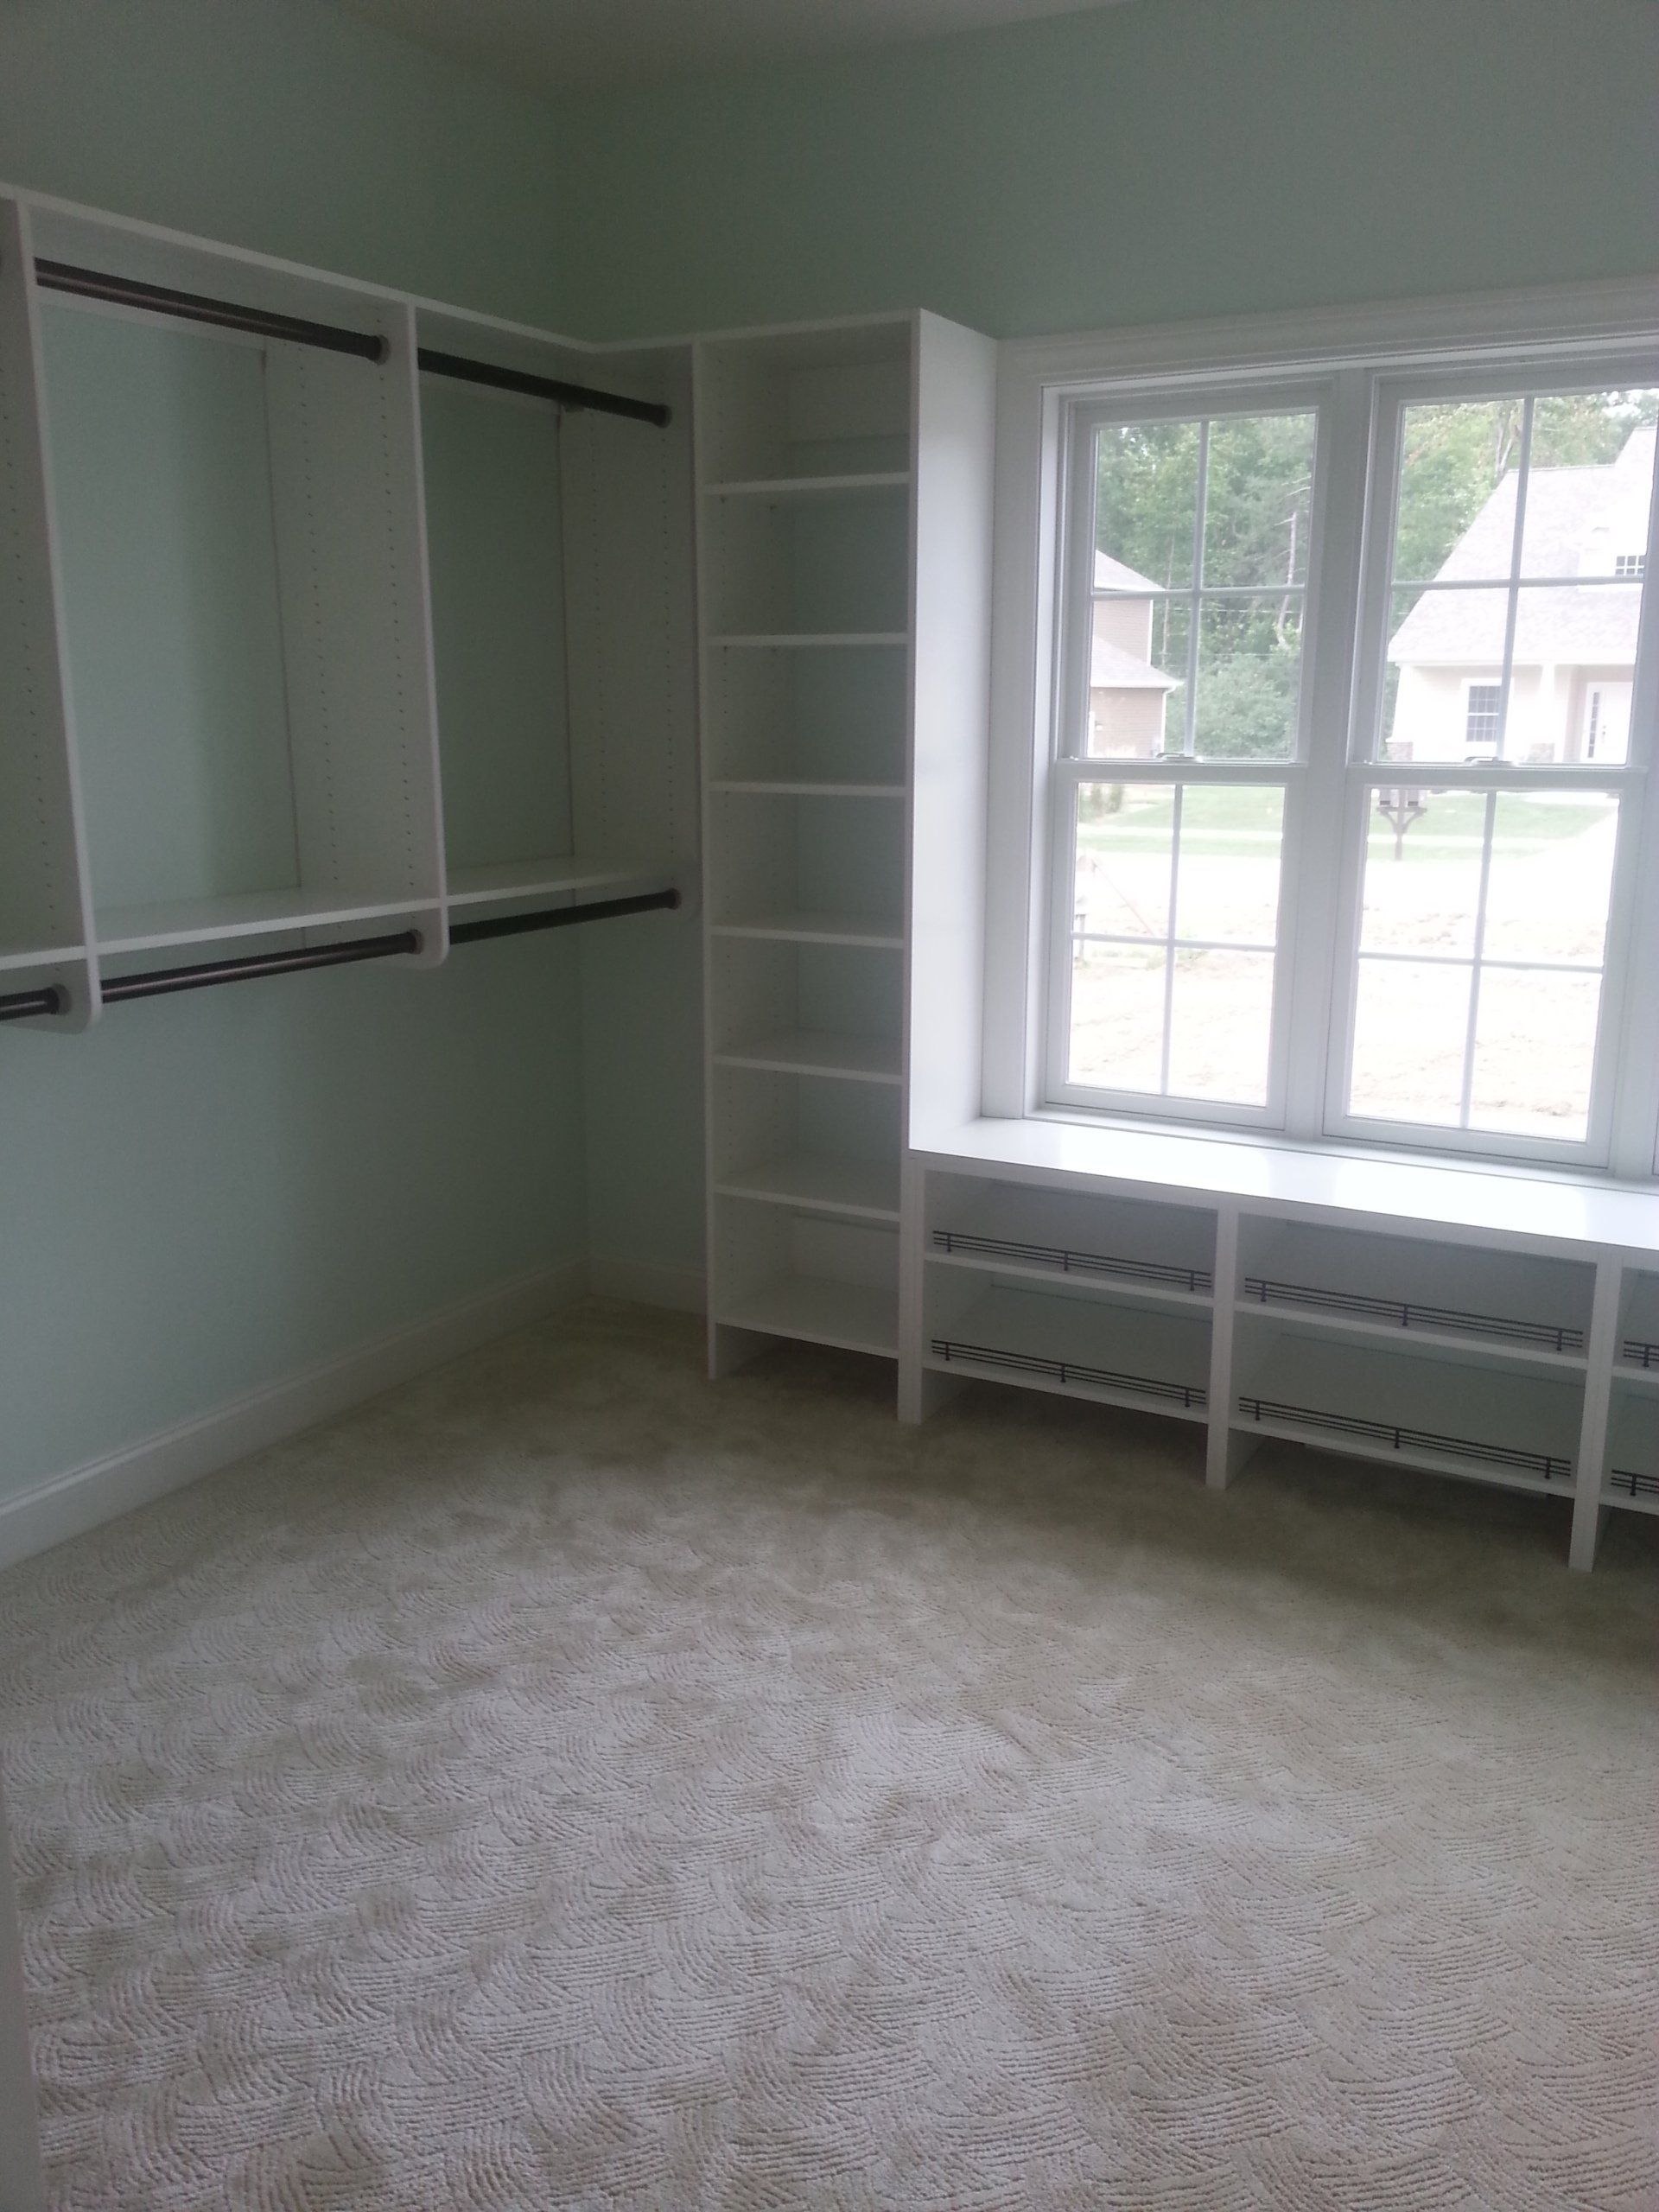 Window — Closet Design & Remodeling in Erie, PA